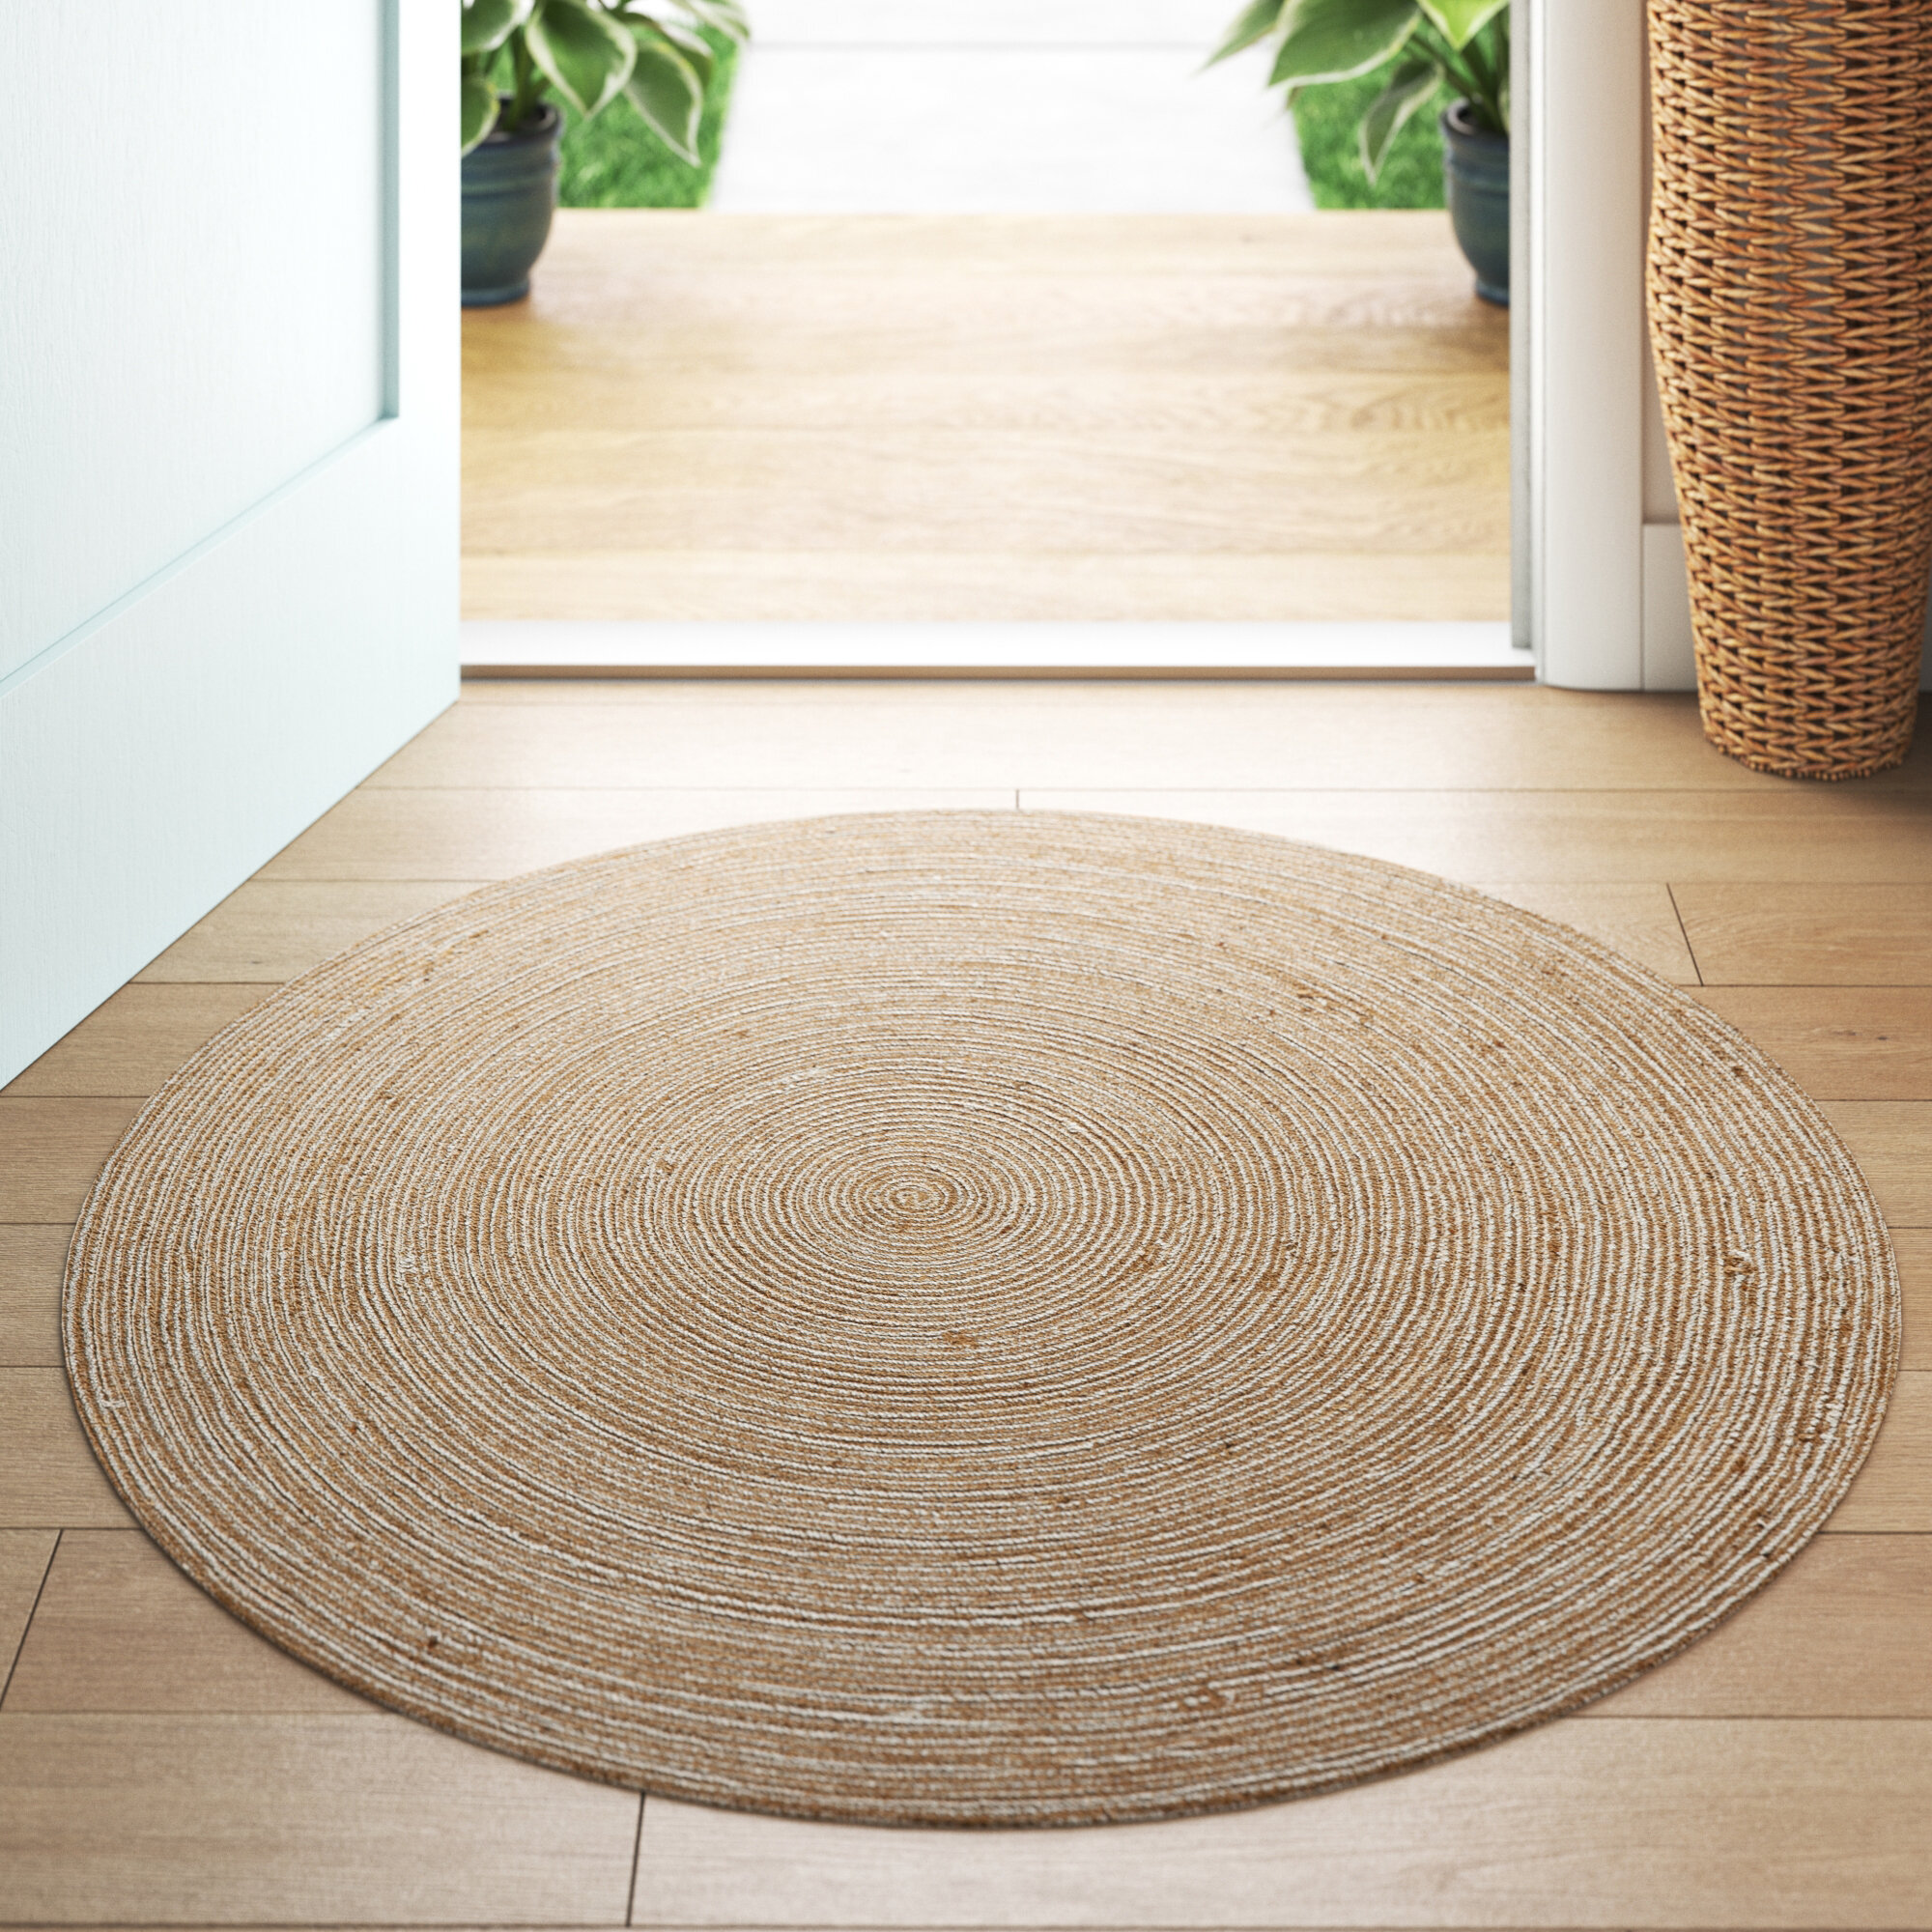 Jute Braided Rug, 4' Round Natural, Hand Woven Reversible Rugs for